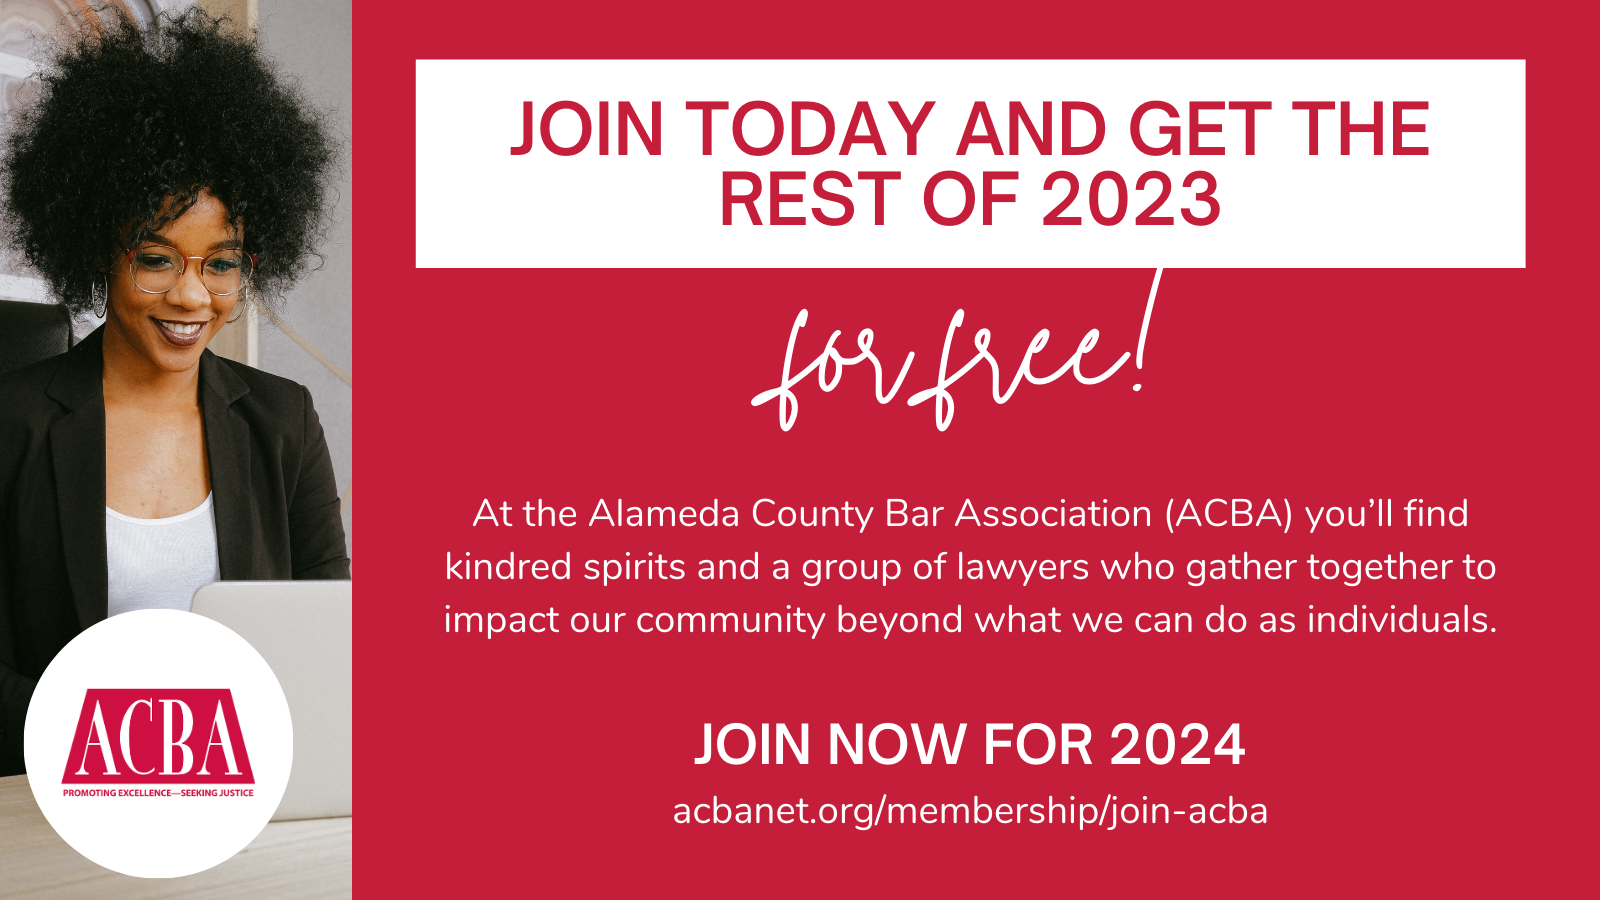 Join today and get the rest of 2023 for free